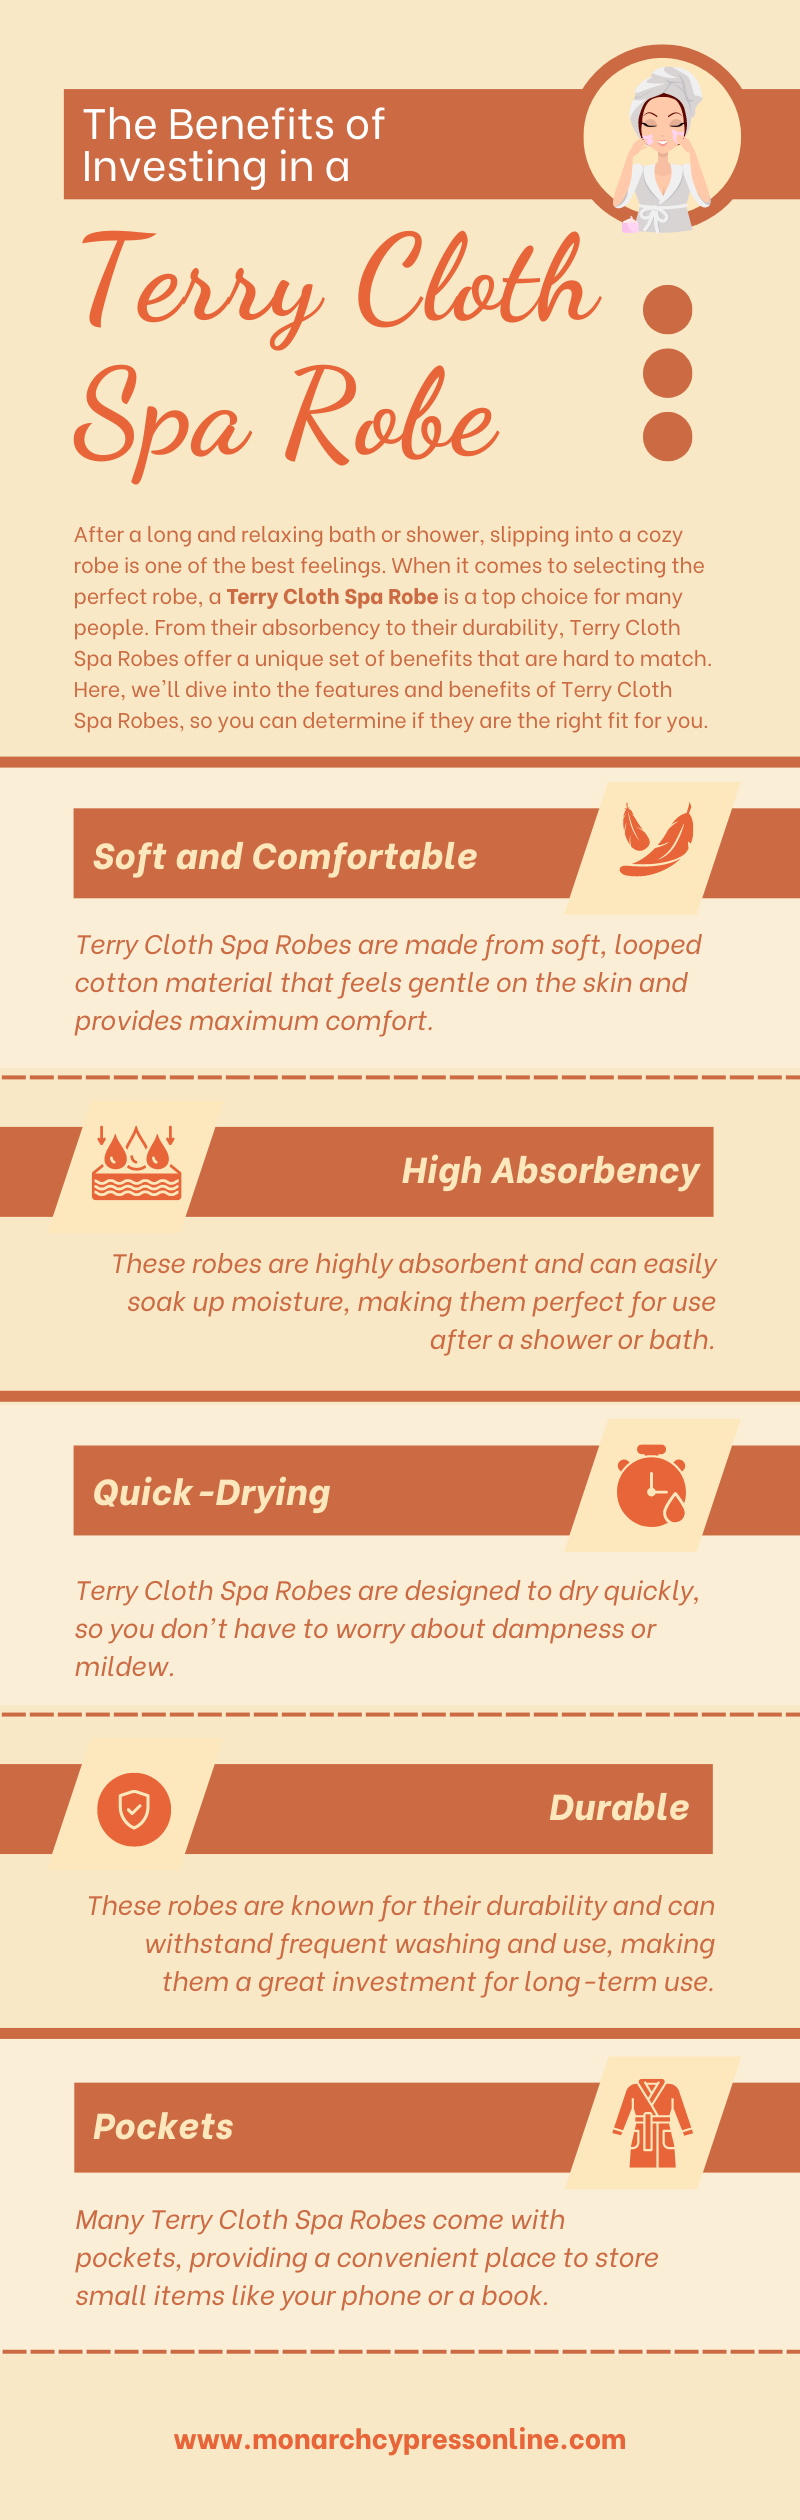 The Benefits of Investing in a Terry Cloth Spa Robe